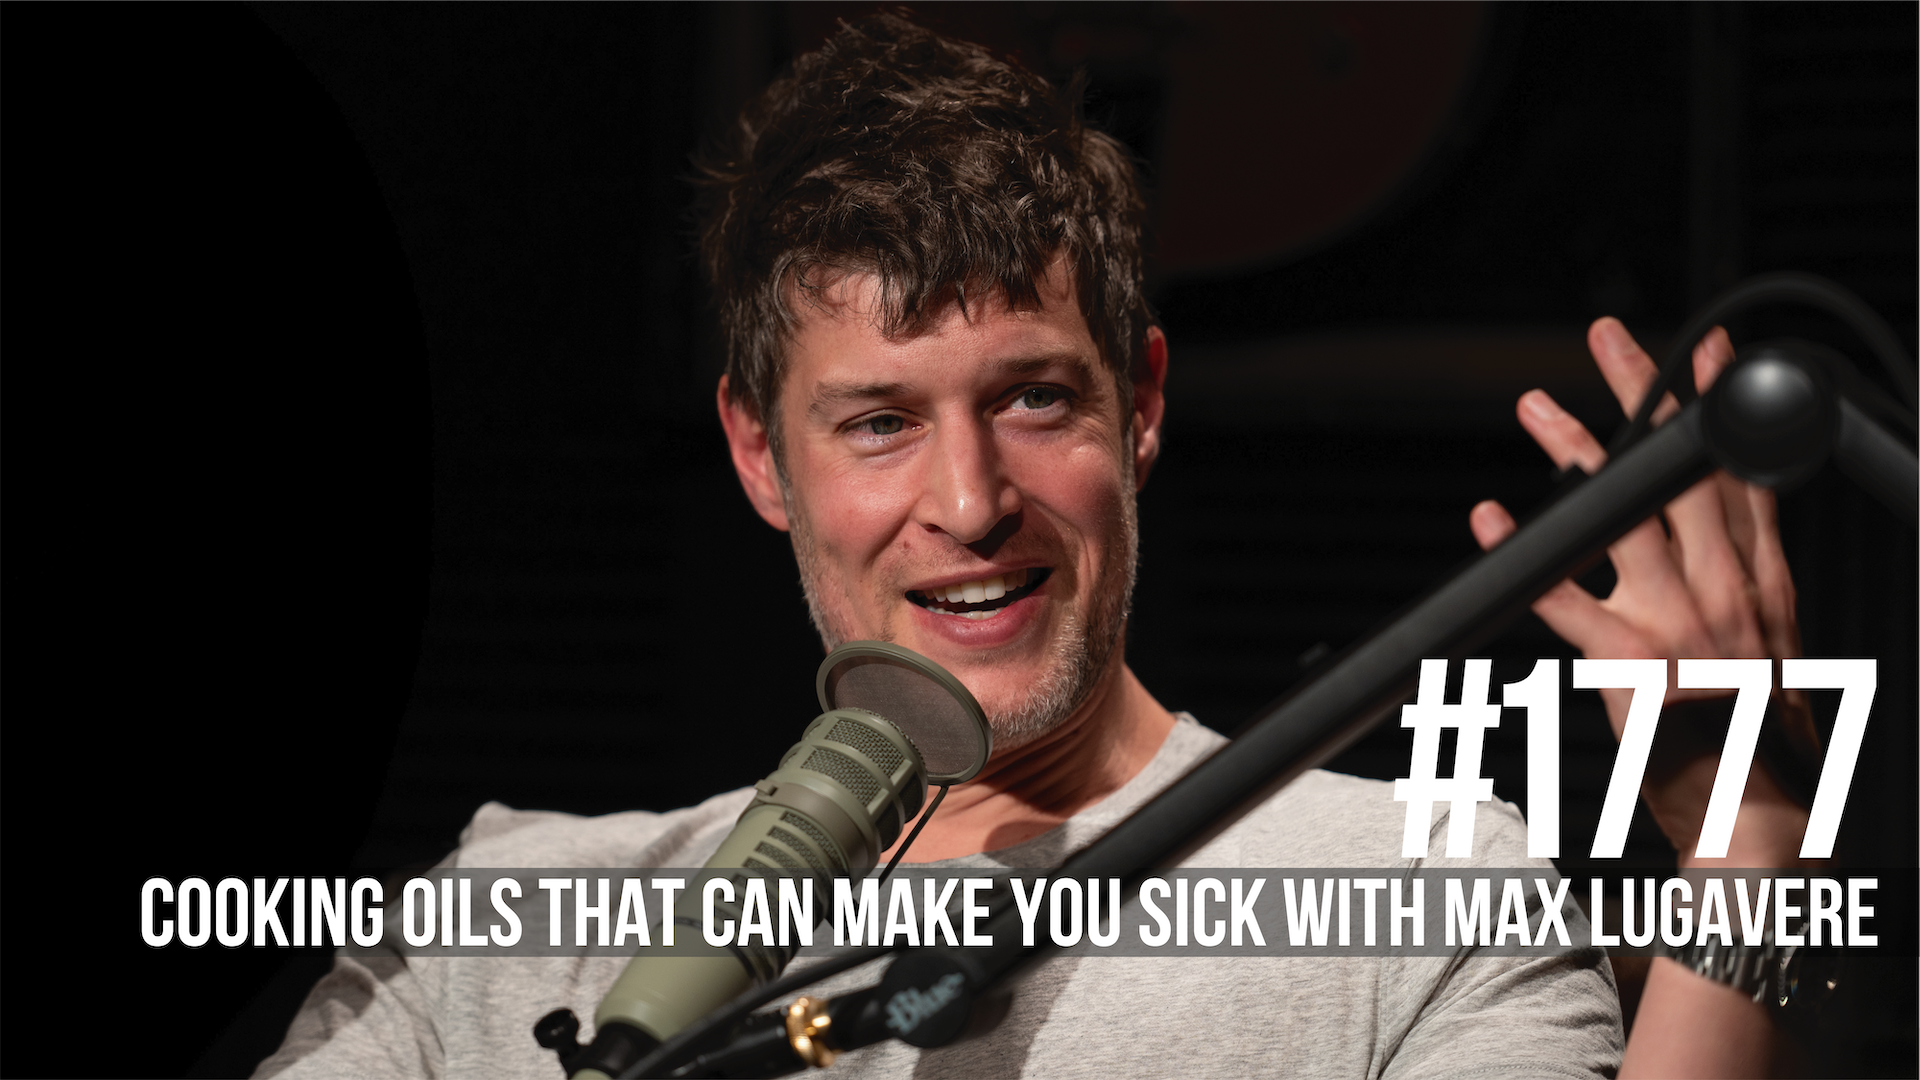 1777: Cooking Oils That Can Make You Sick With Max Lugavere